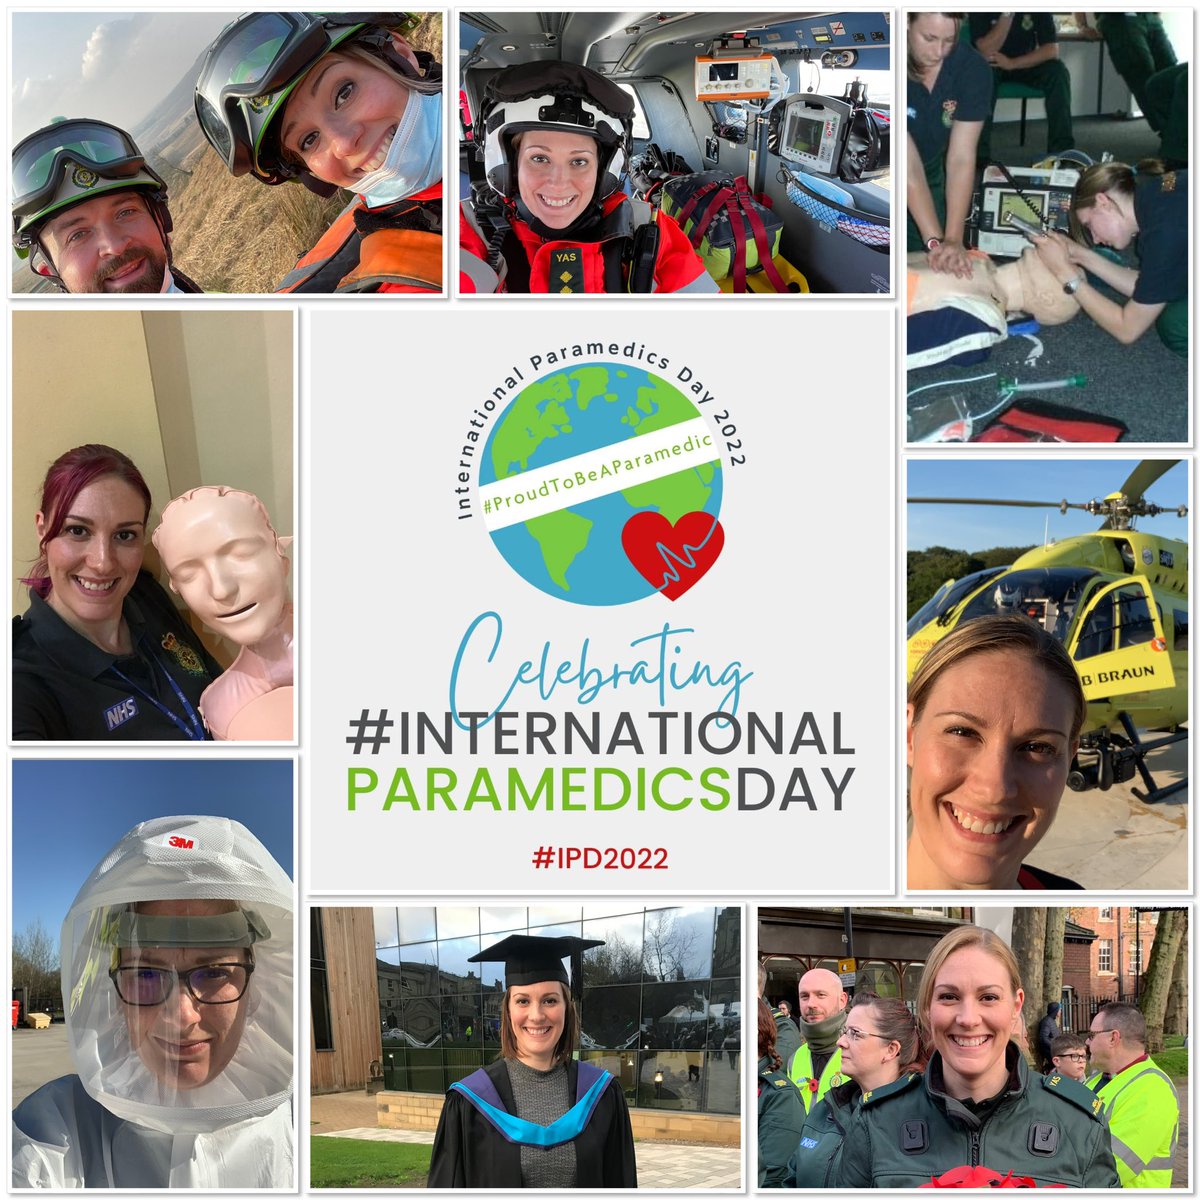 #ProudToBeAParamedic on the first ever #internationalparamedicsday 🚑

#ipd2022 @ParamedicsUK @ParamedicsDay